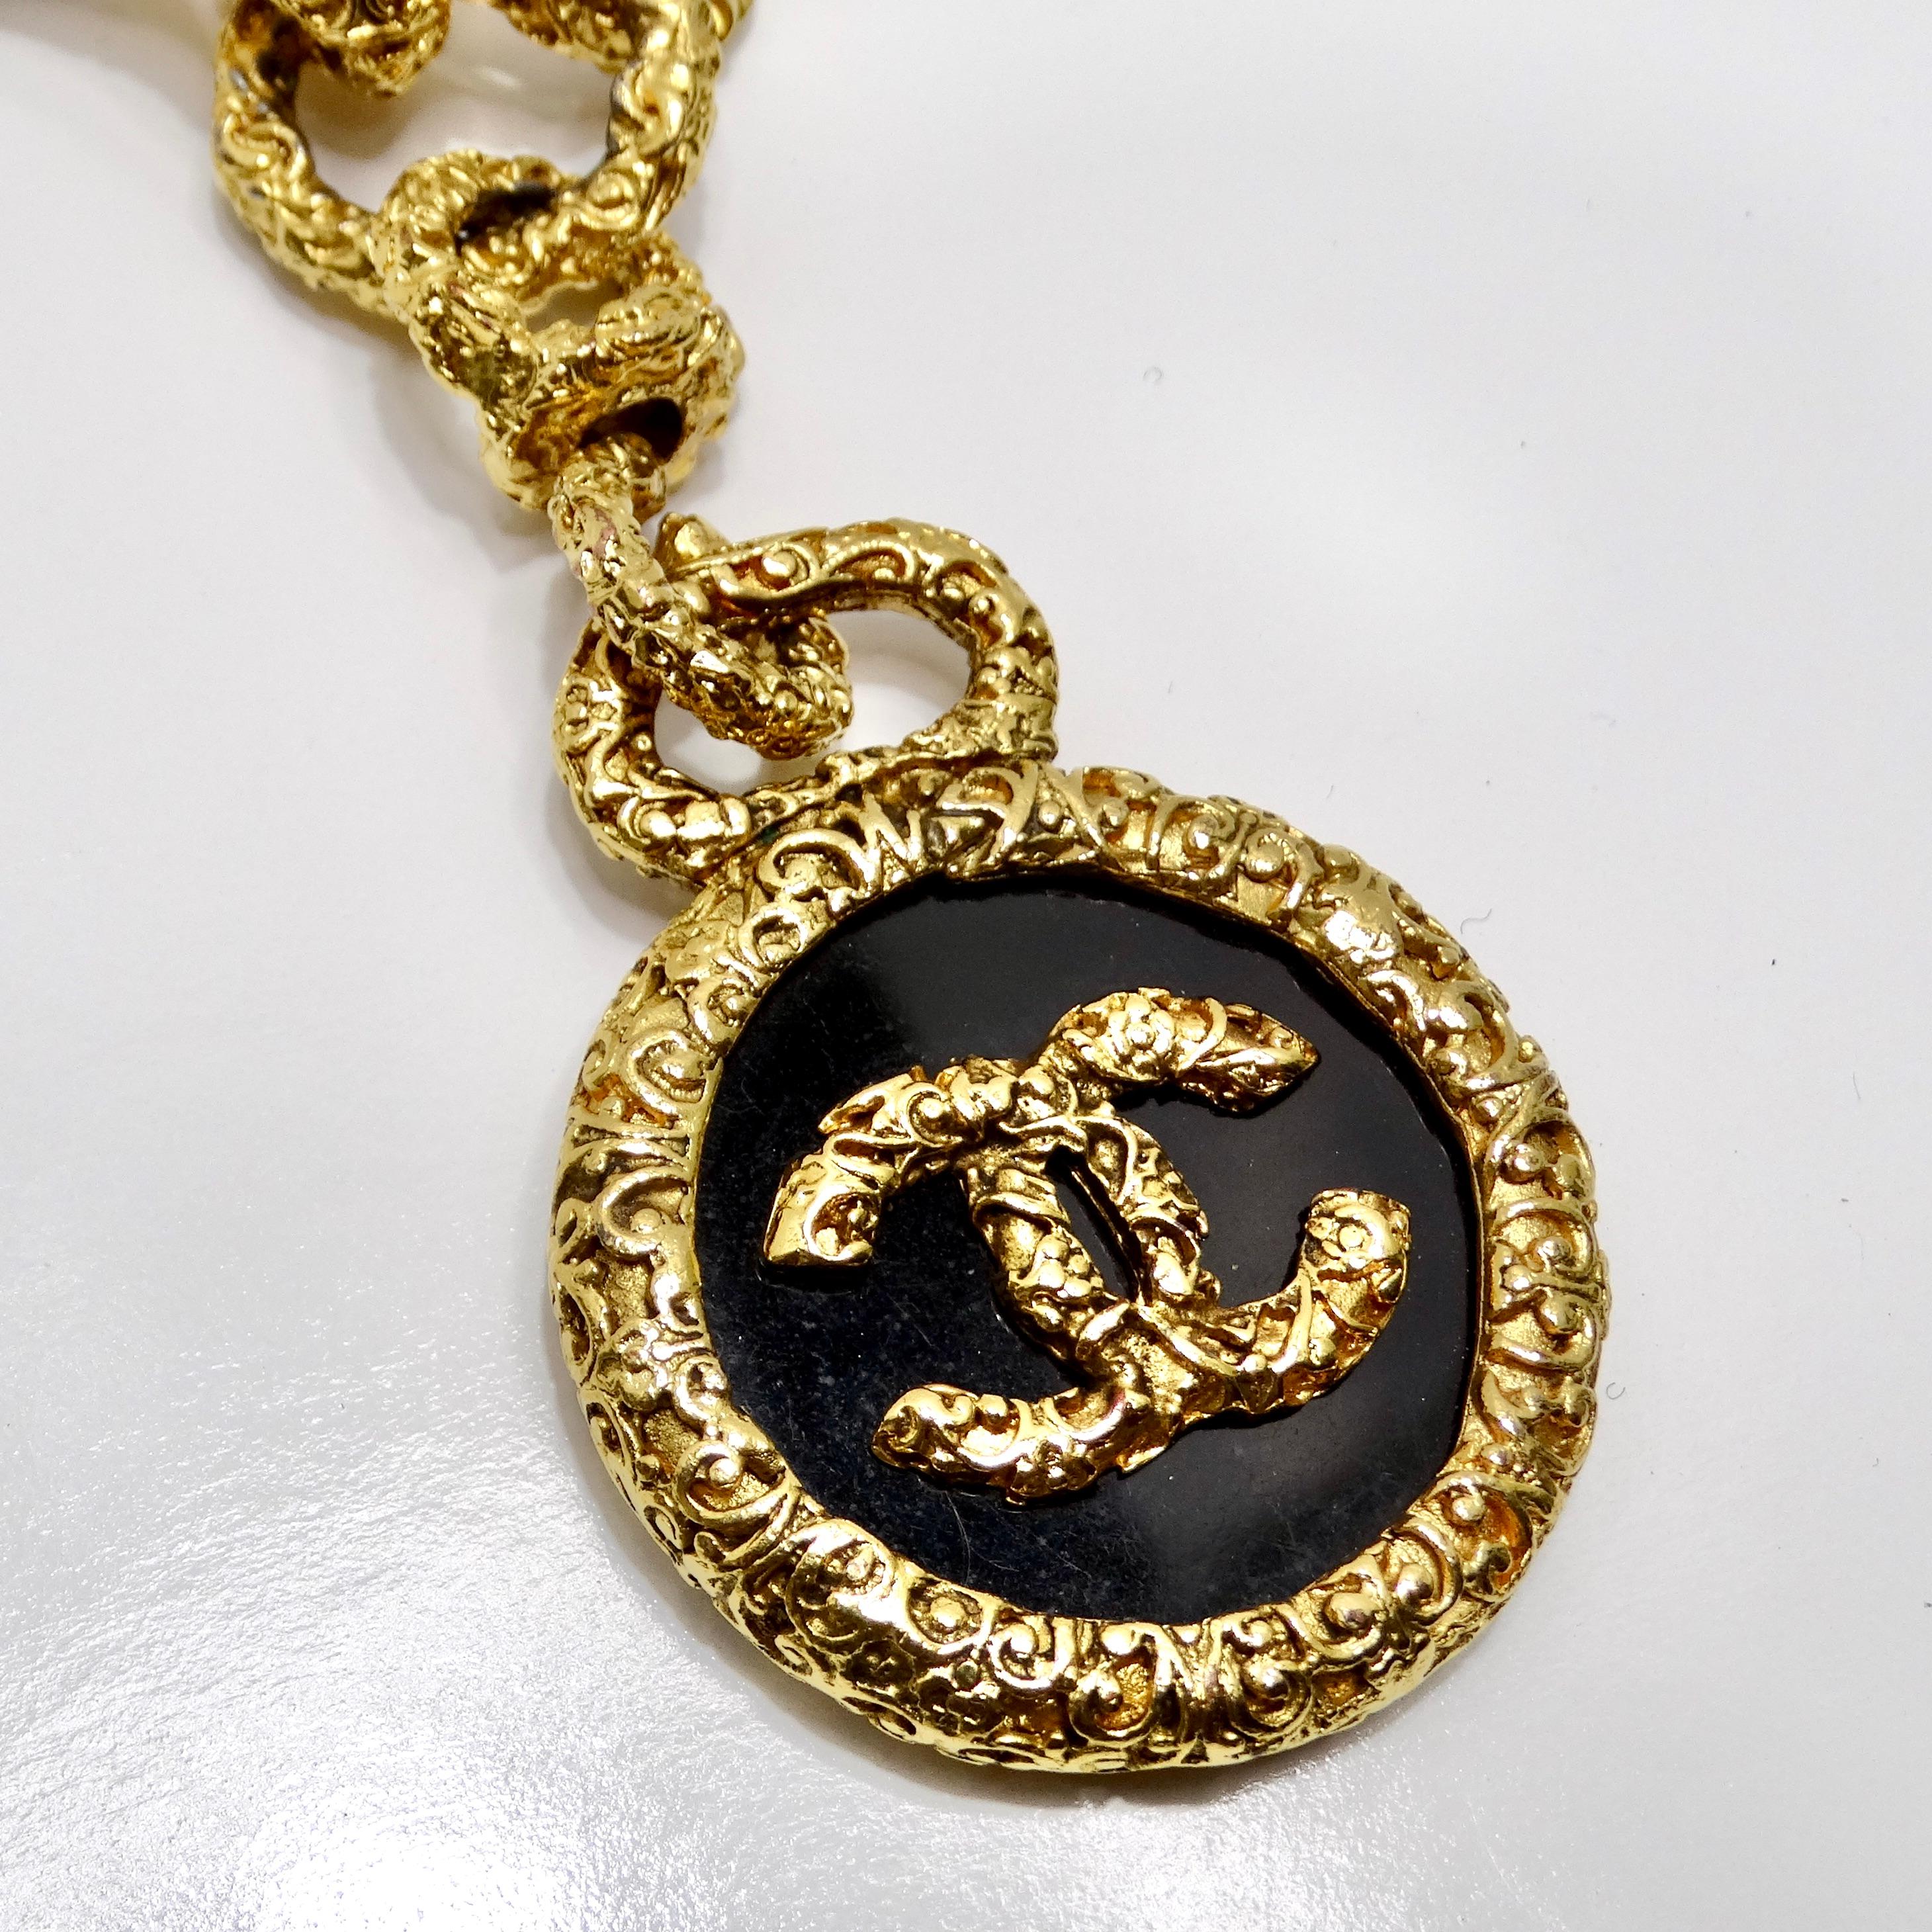 Introducing the exquisite Chanel 1993 Gold Tone Black CC Medallion Florentine Necklace, a timeless treasure that exudes luxury and sophistication. Crafted with meticulous attention to detail, this stunning necklace is sure to elevate any ensemble